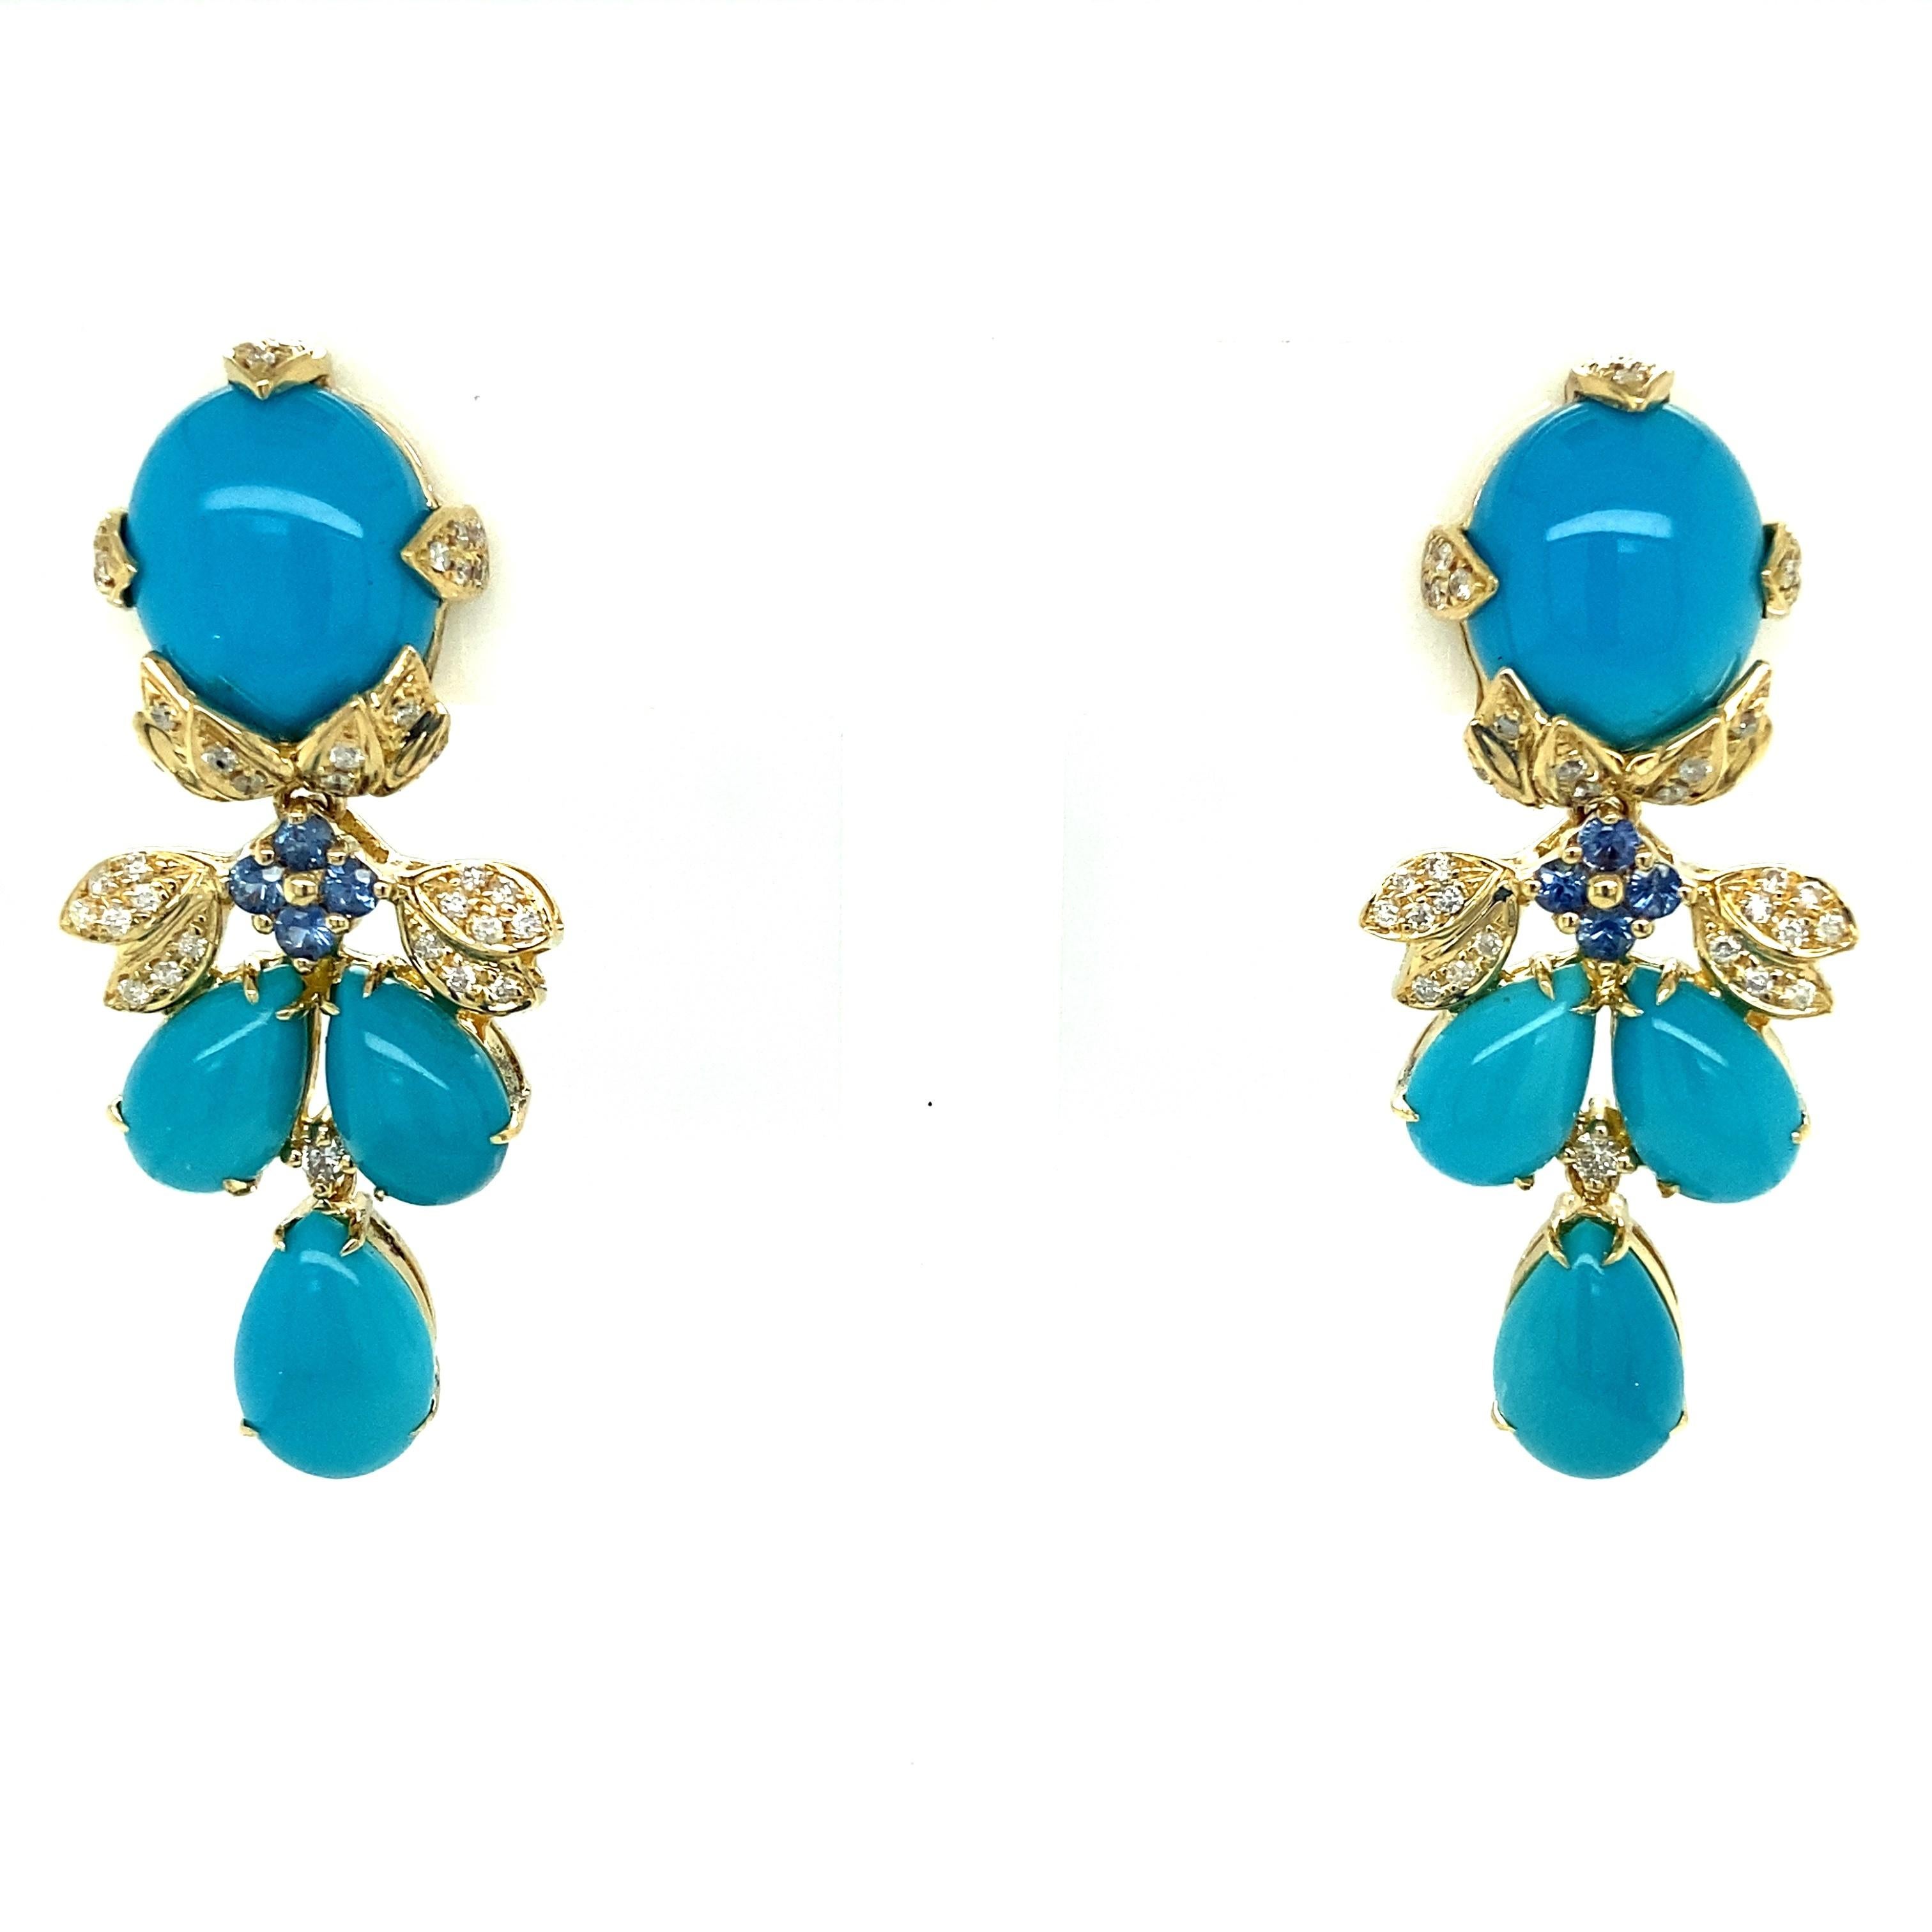 One pair of 18 karat yellow gold earrings, each set with four Persian cabochon turquoise stones, approximately 10 carats total weight, four round faceted Ceylon sapphires, and forty-two round brilliant cut diamonds, approximately 0.30-carat total